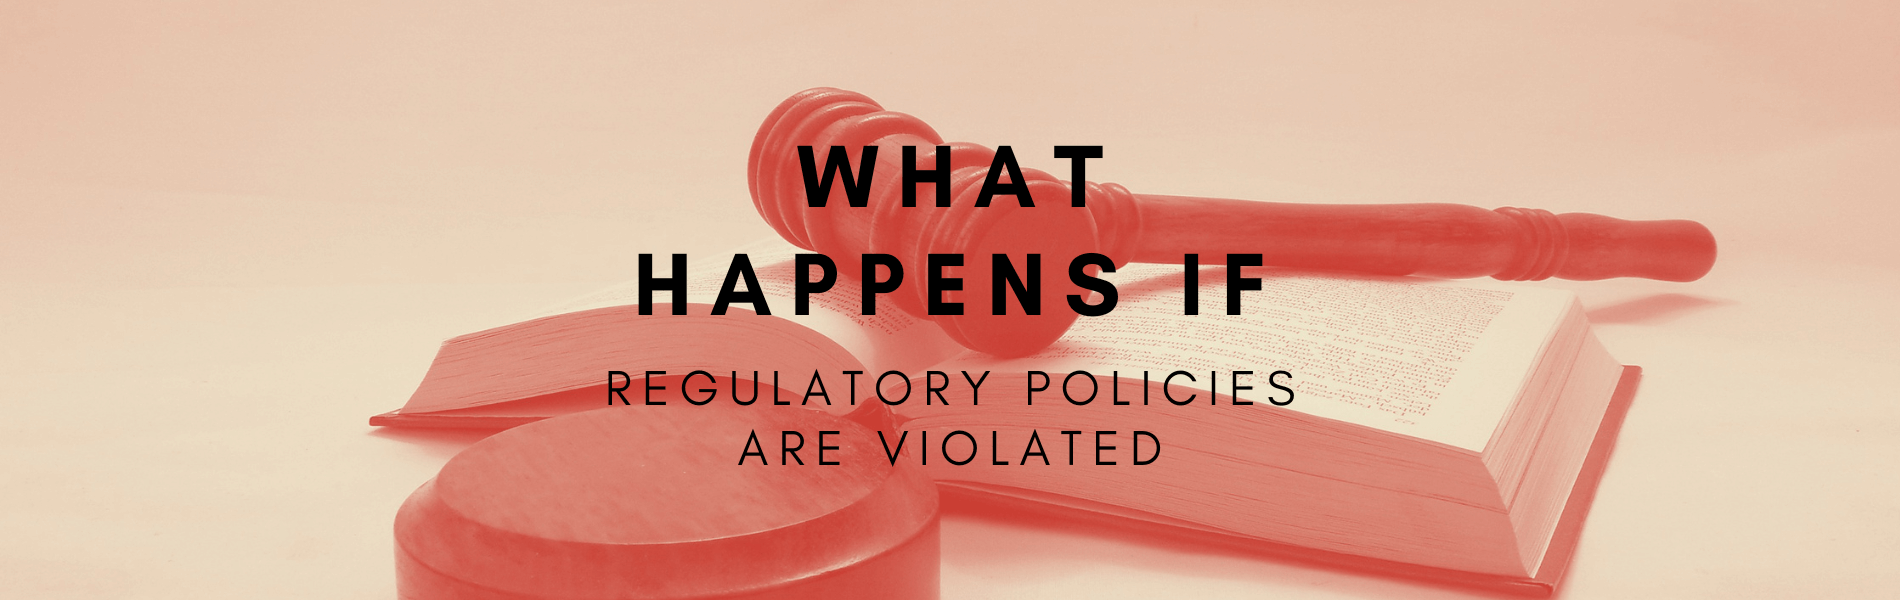 what happens if regulatory policies for a business are violated